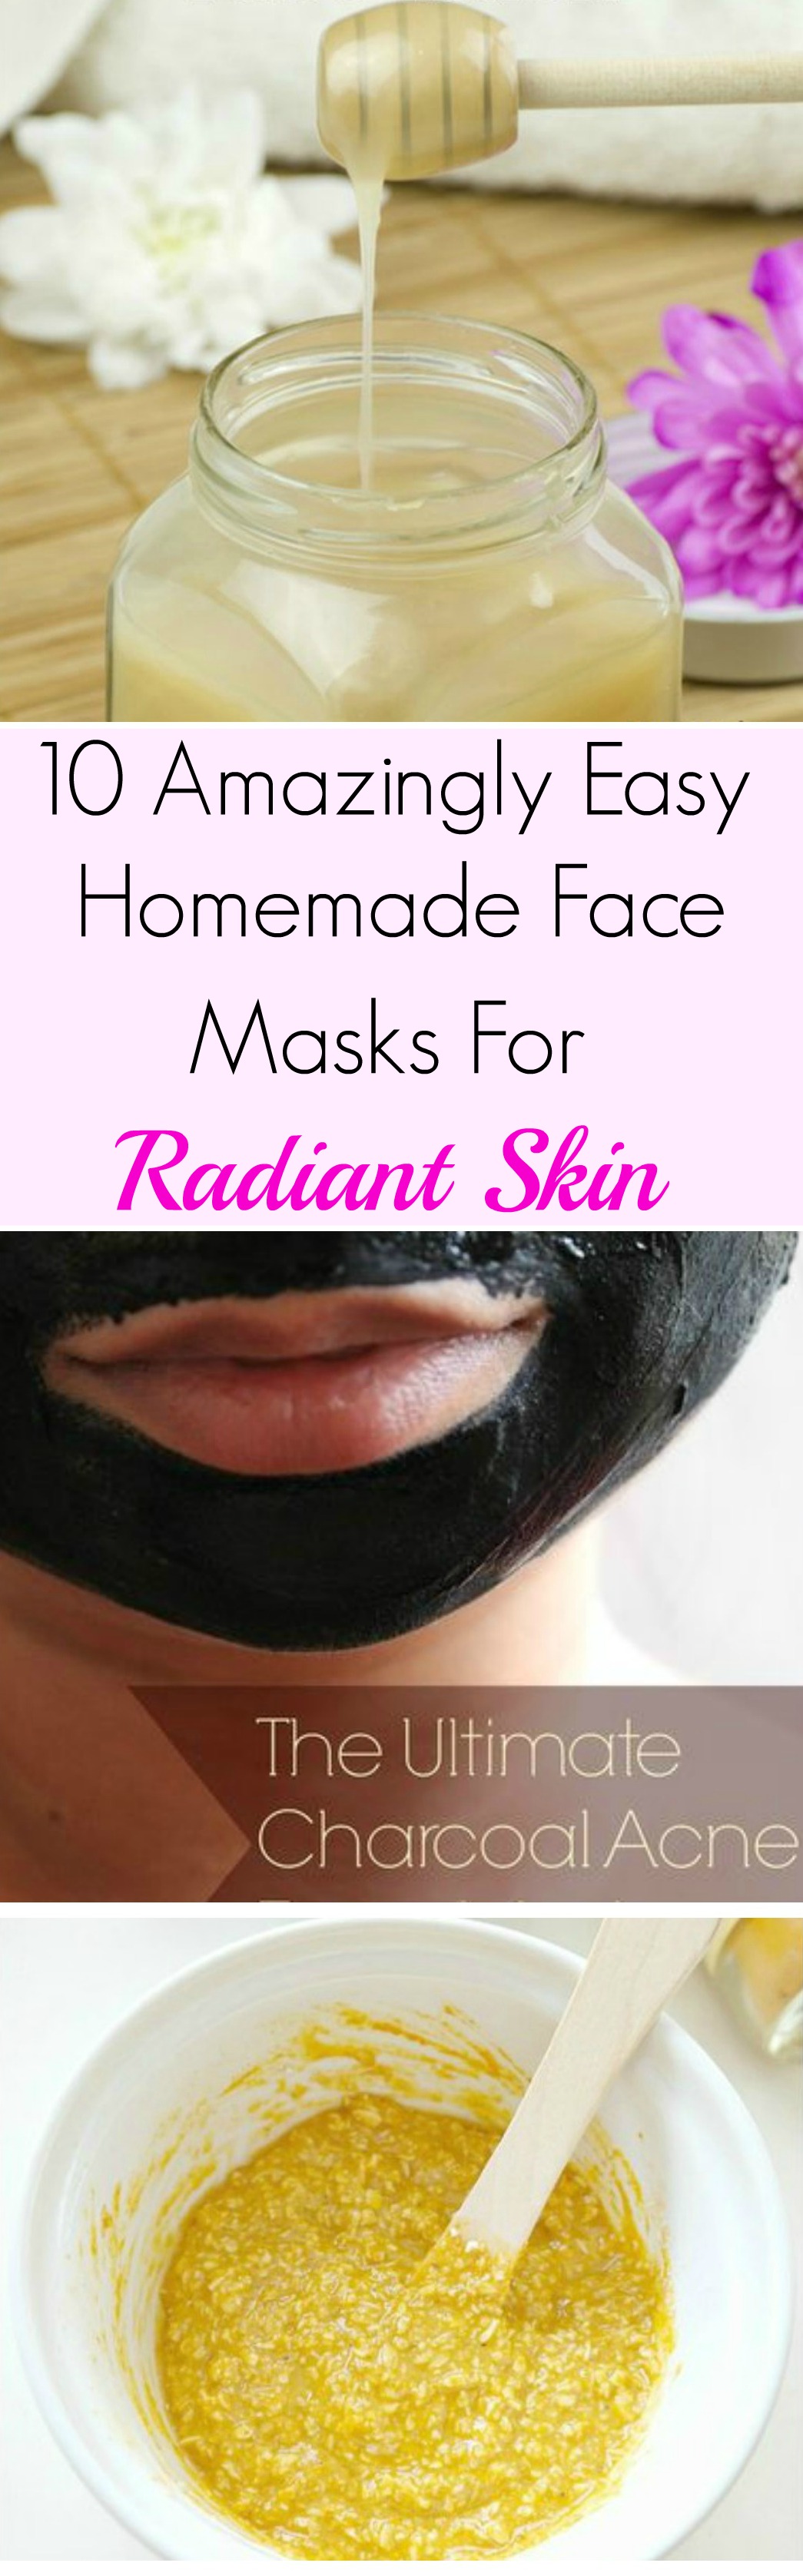 10 Amazingly Easy Homemade Face Masks For Radiant Skin. Wonderful list of DIY face masks. These are extremely simple to make to make and are great for your skin. Honey, turmeric, charcoal, coconut oil, and cinnamon are among the wonderful ingredients in these masks